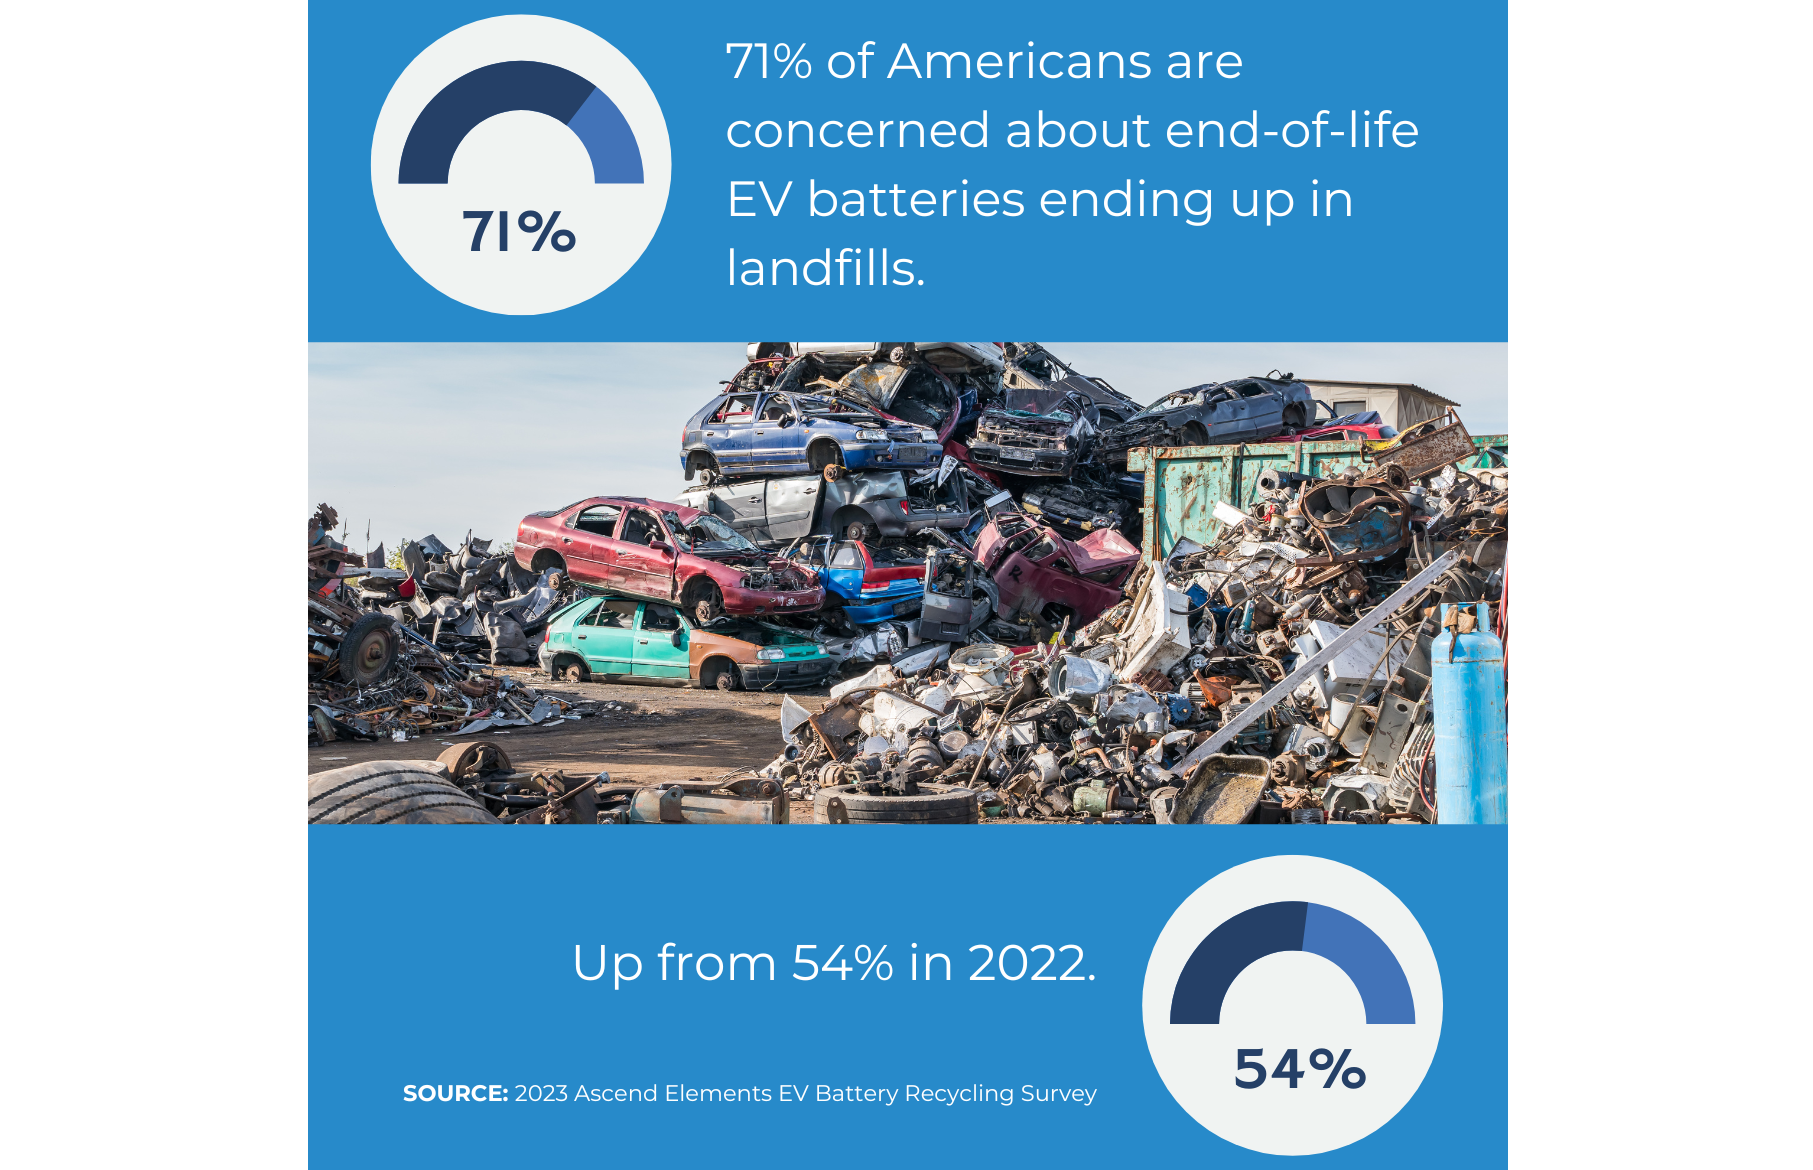 Growing American concerns over electric vehicle battery disposal